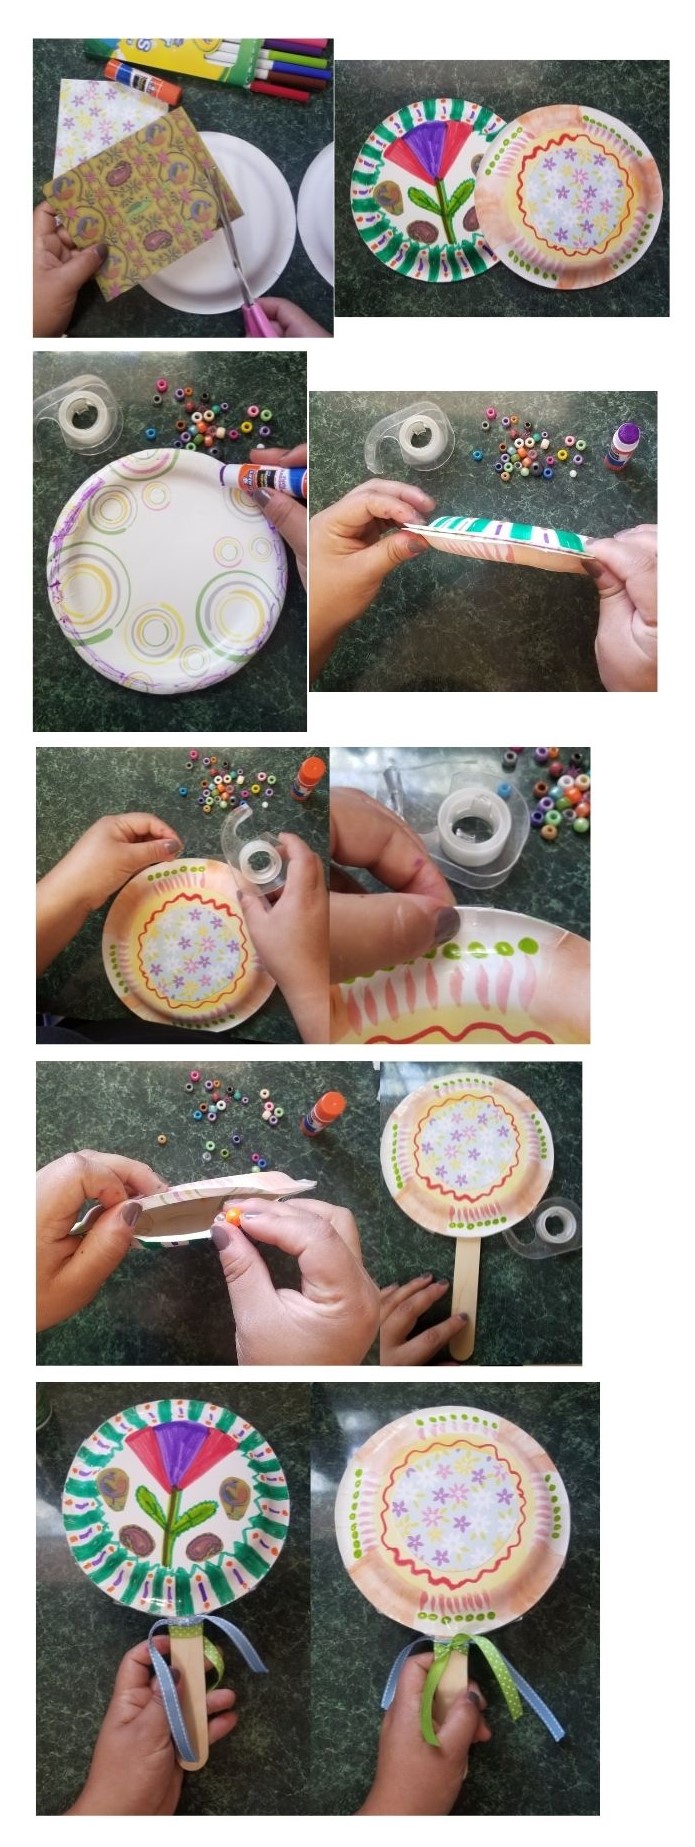 A grouping of images showing the steps of how to make a maraca using paper plates, beads and popsicle stick.